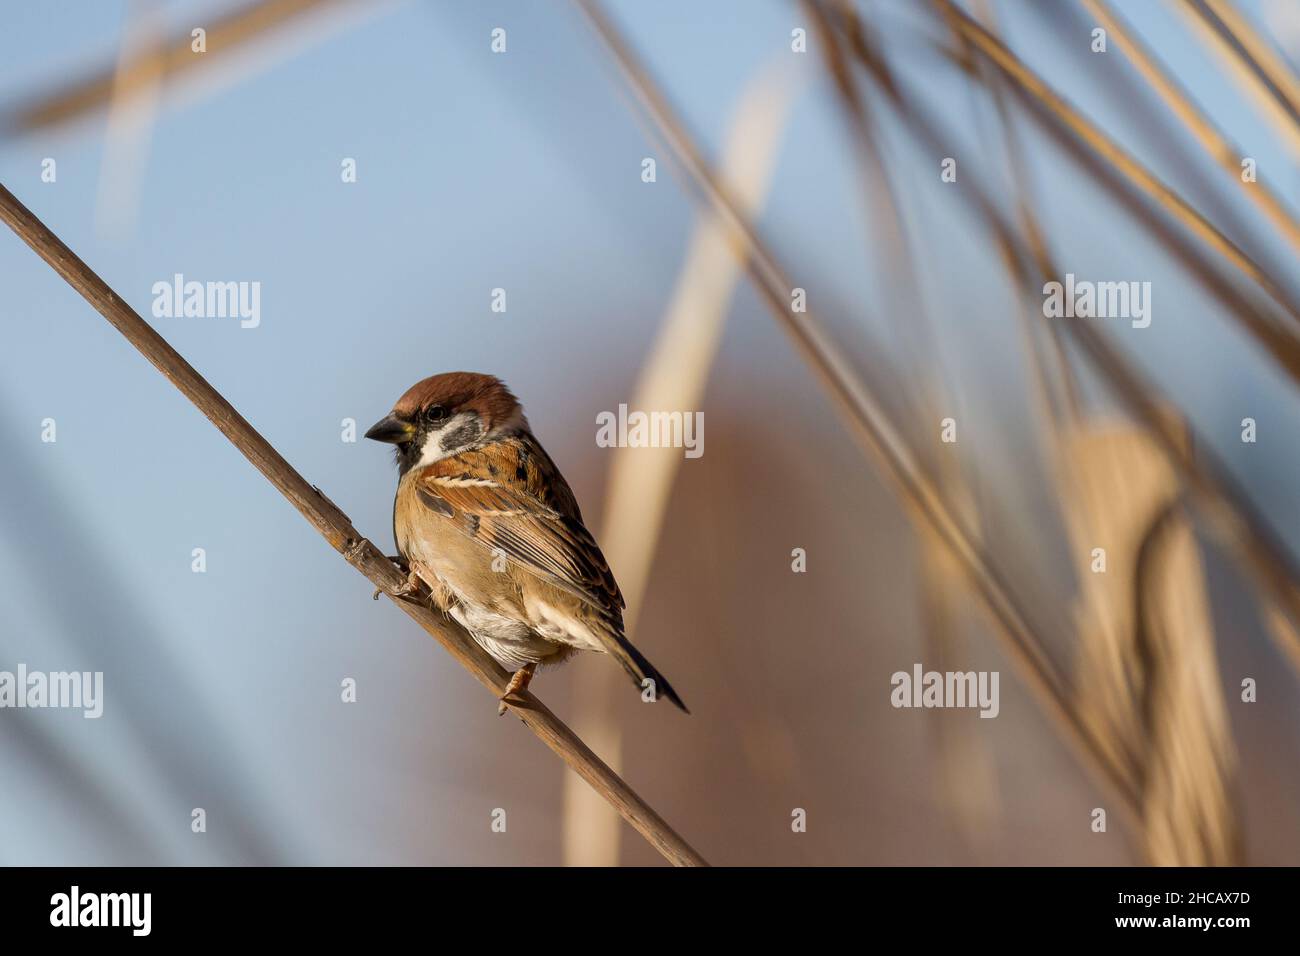 A male Eurasian Tree Sparrow (Passer montanus) on reeds in Ueno Park, Tokyo, Japan. Stock Photo